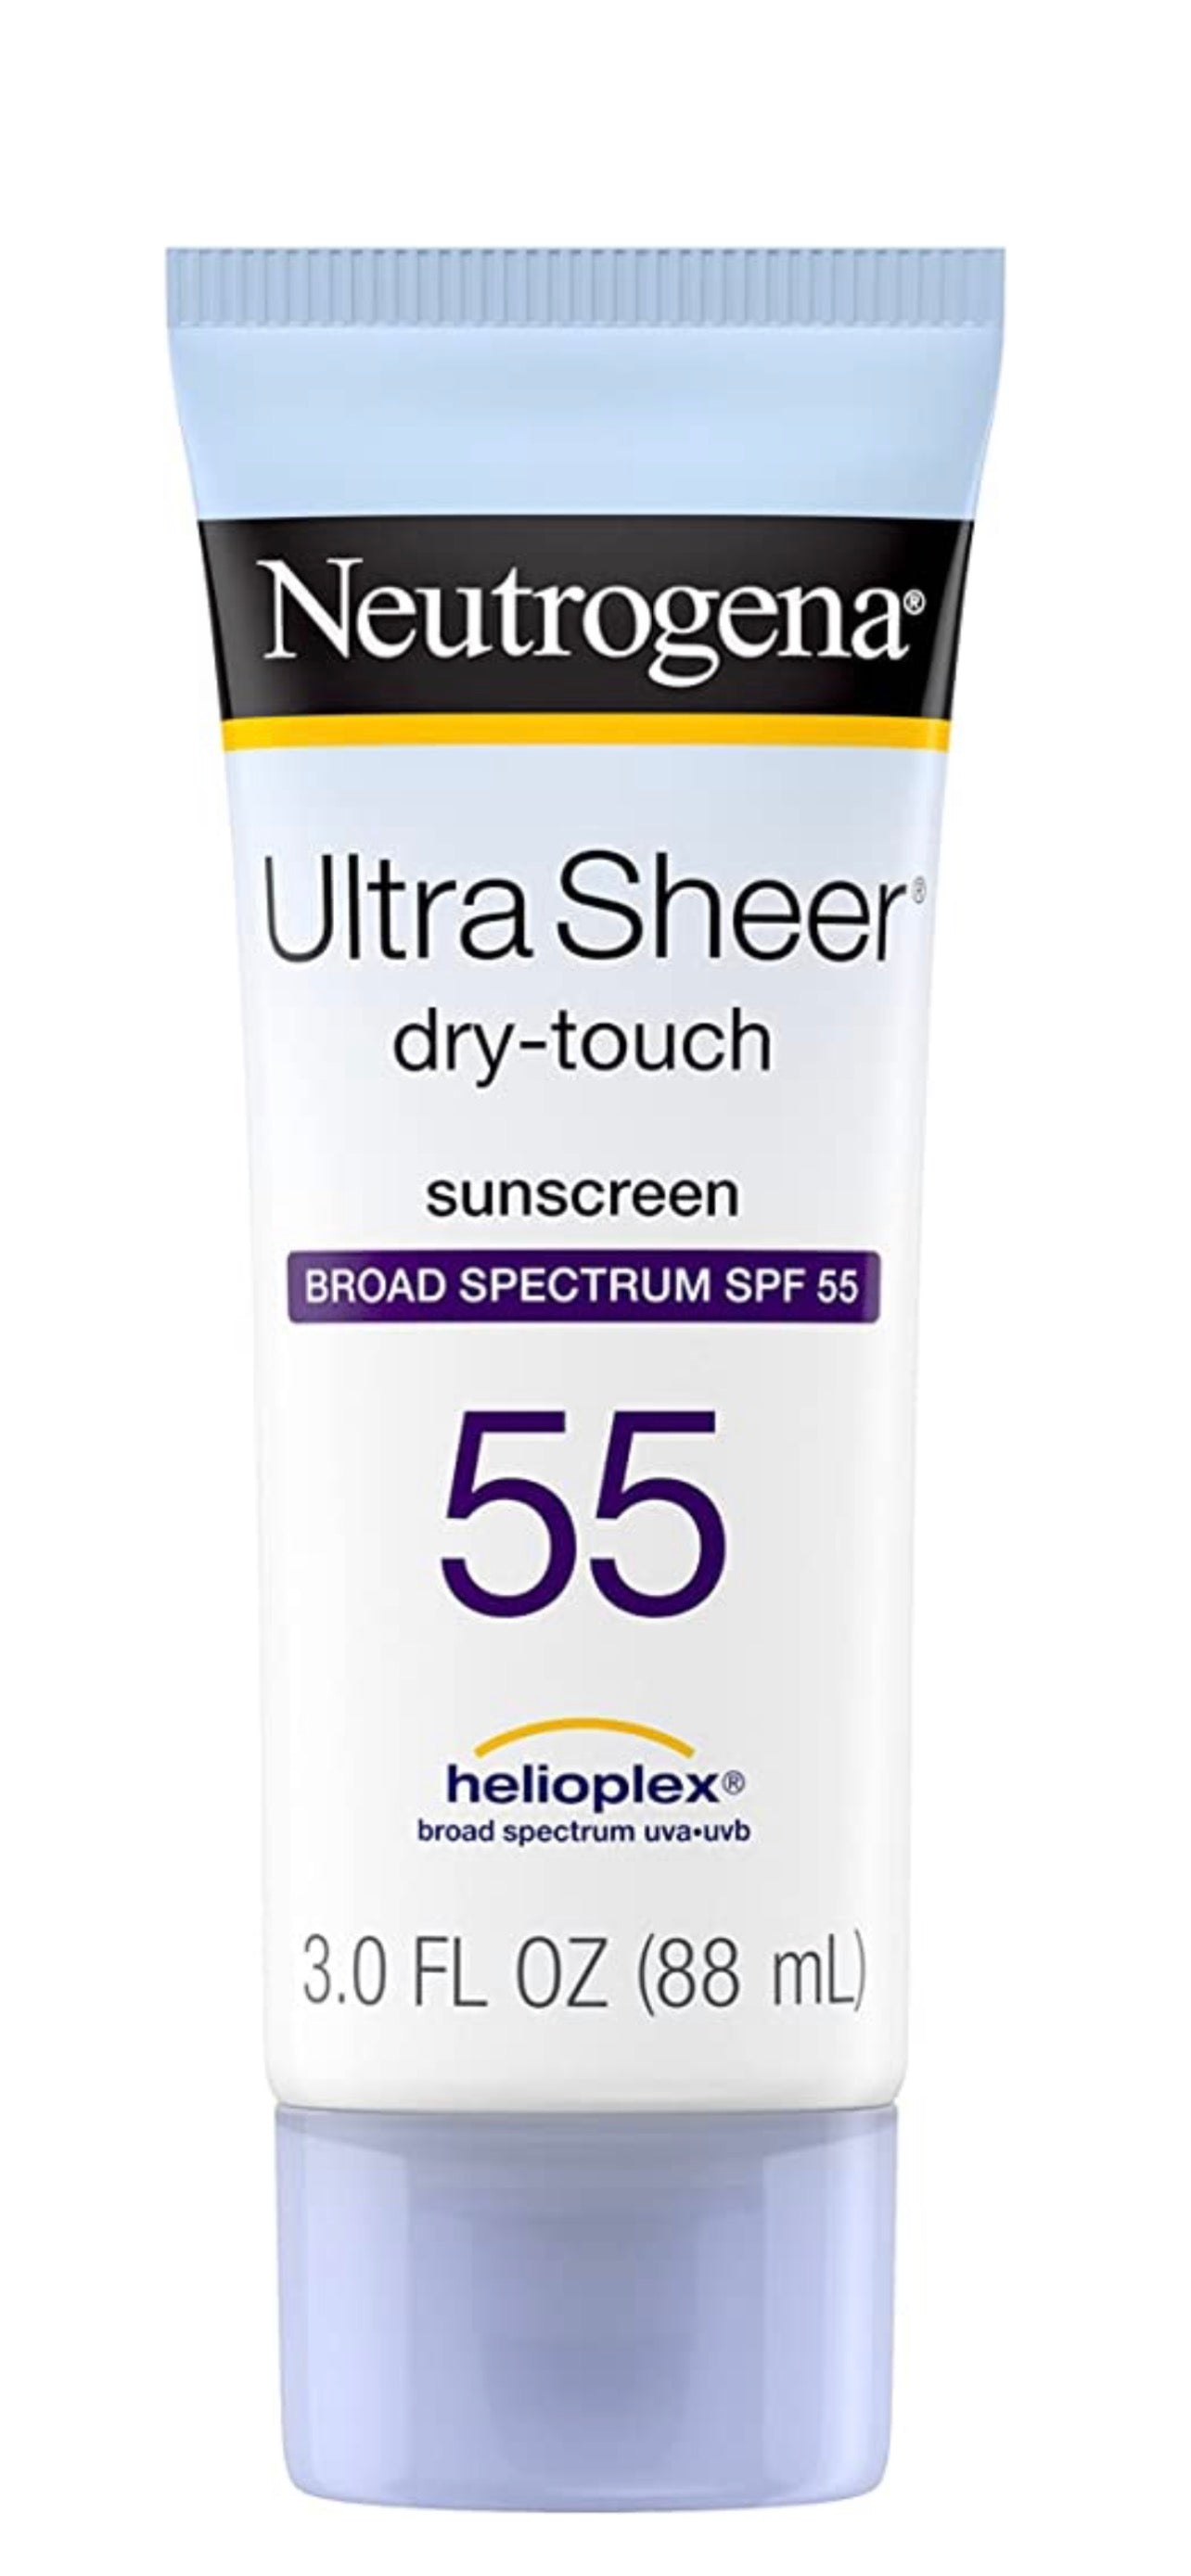 Neutrogena Ultra Sheer Dry-Touch Sunscreen Lotion 5 oz, Broad Spectrum SPF 55 UVA/UVB Protection, Light, Water Resistant, Non-Comedogenic & Non-Greasy - Supporting ORCRF.org